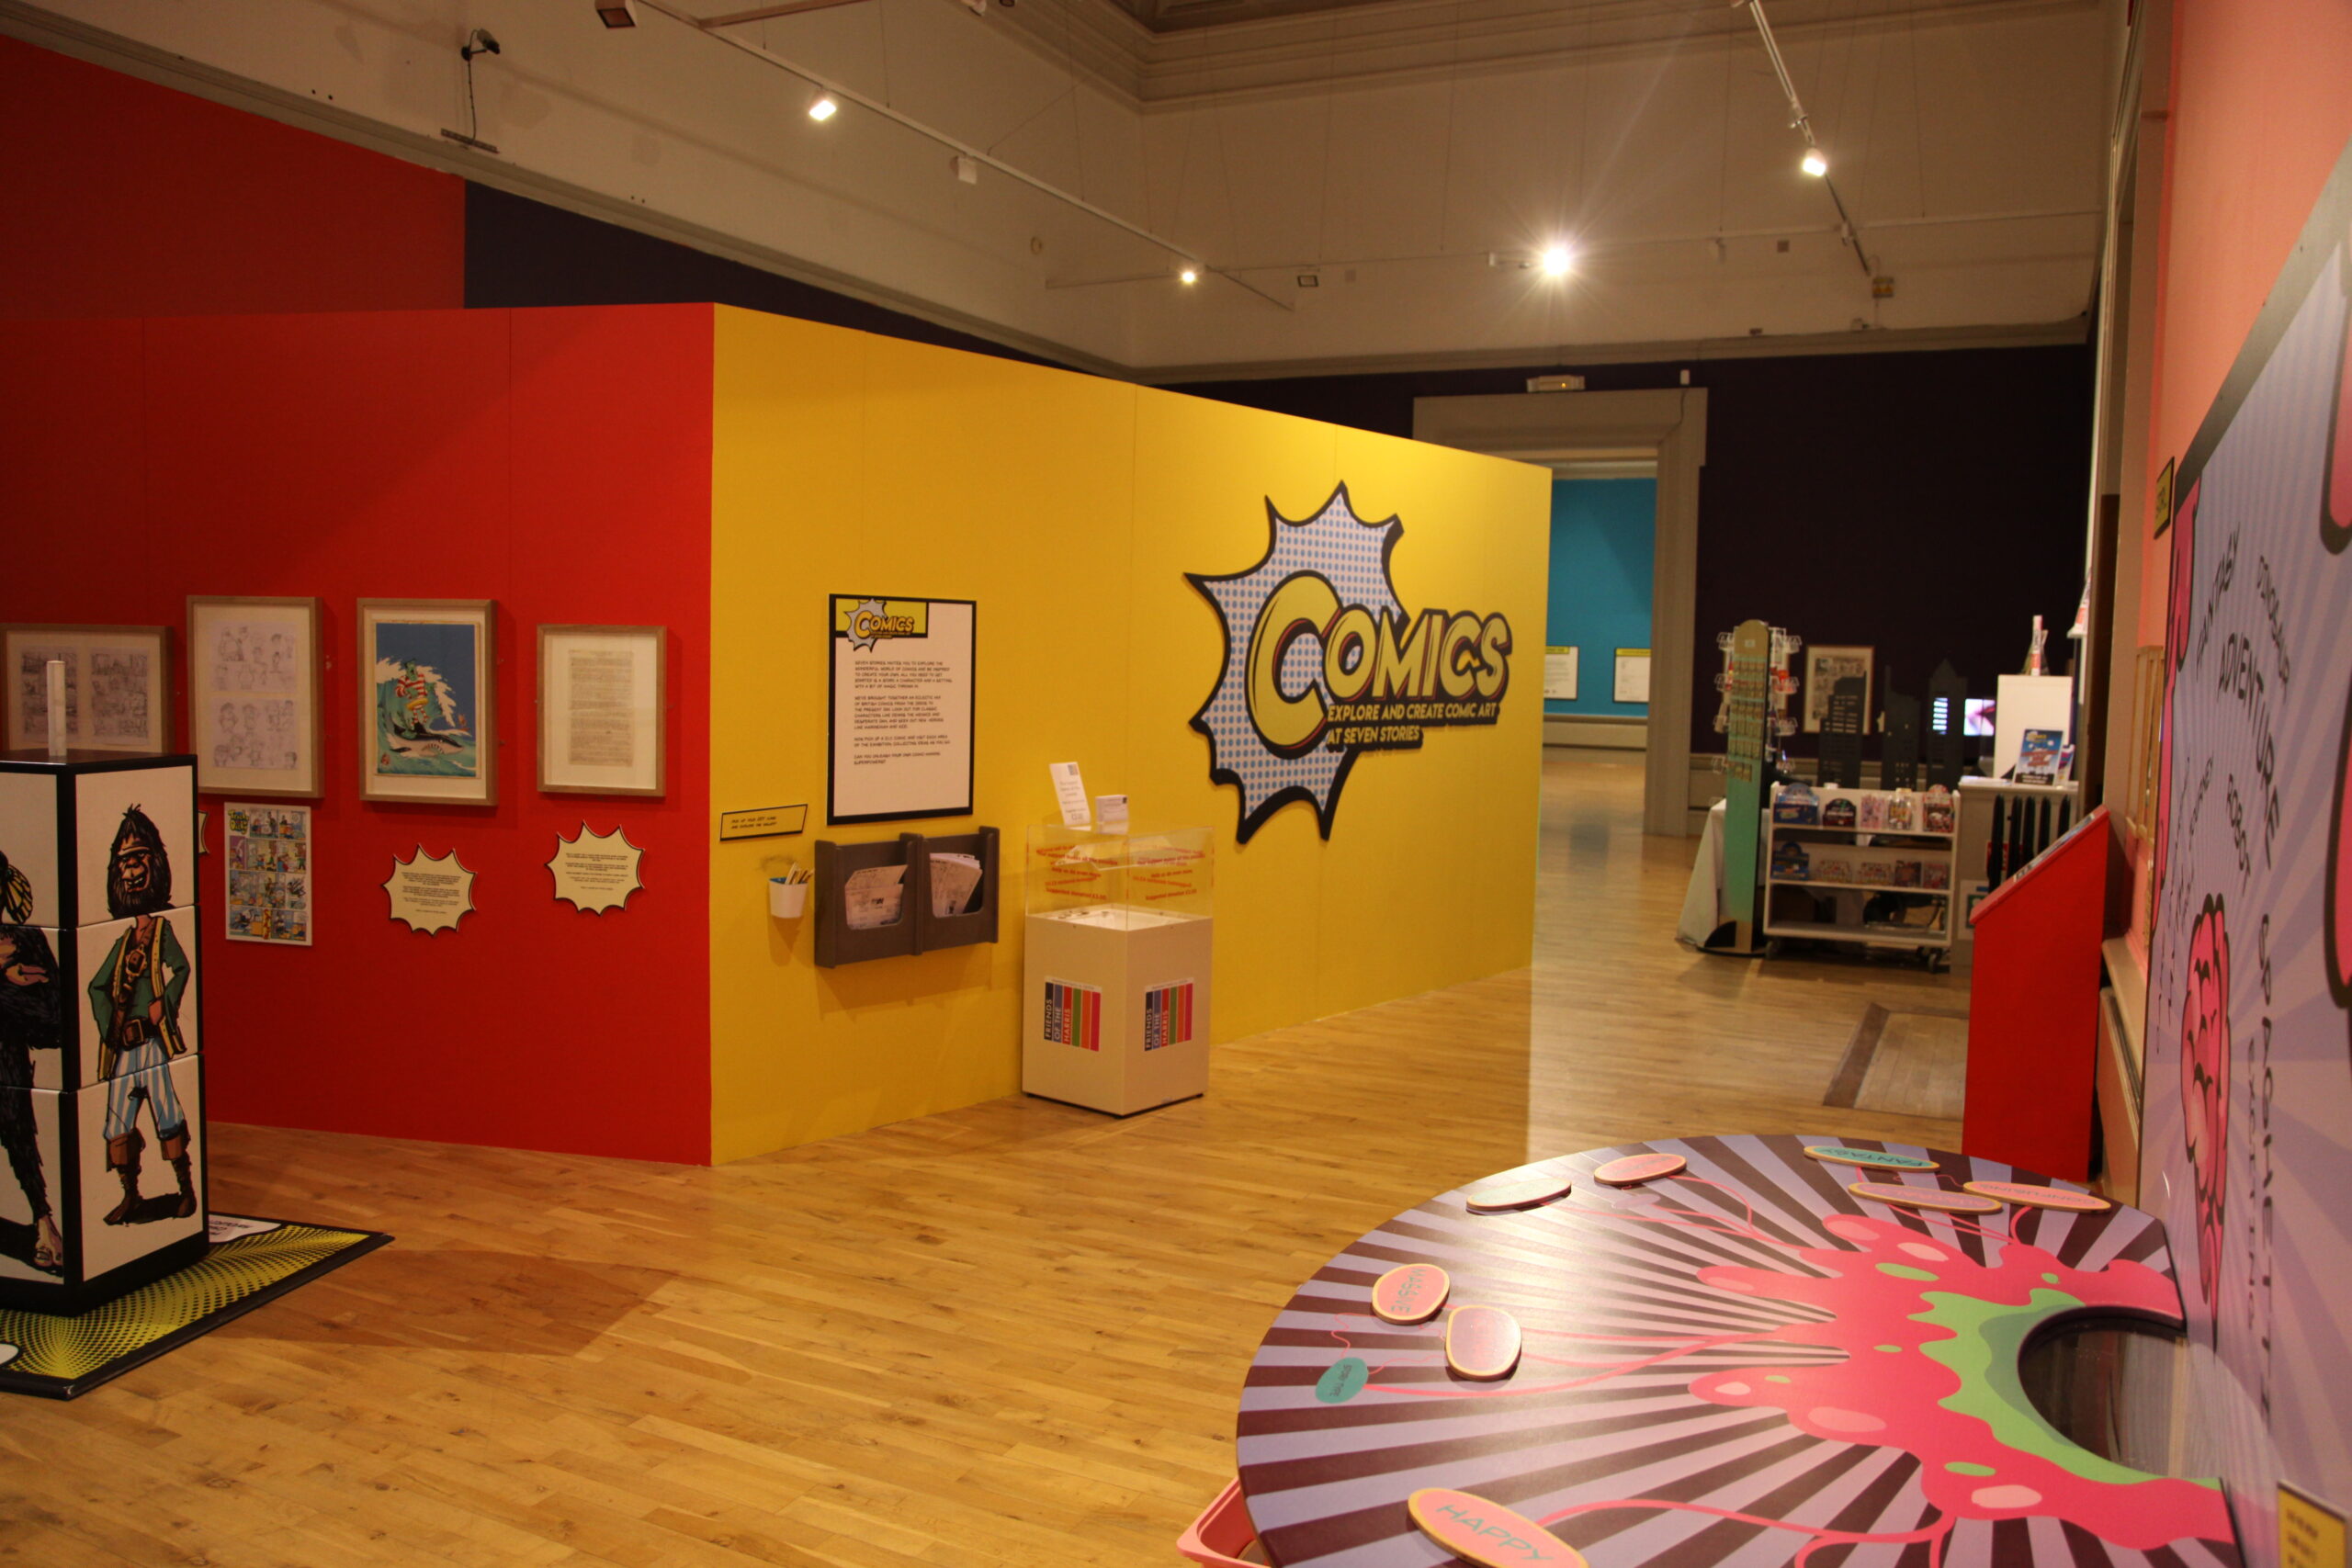 A colourful comics exhibition at the Harris.